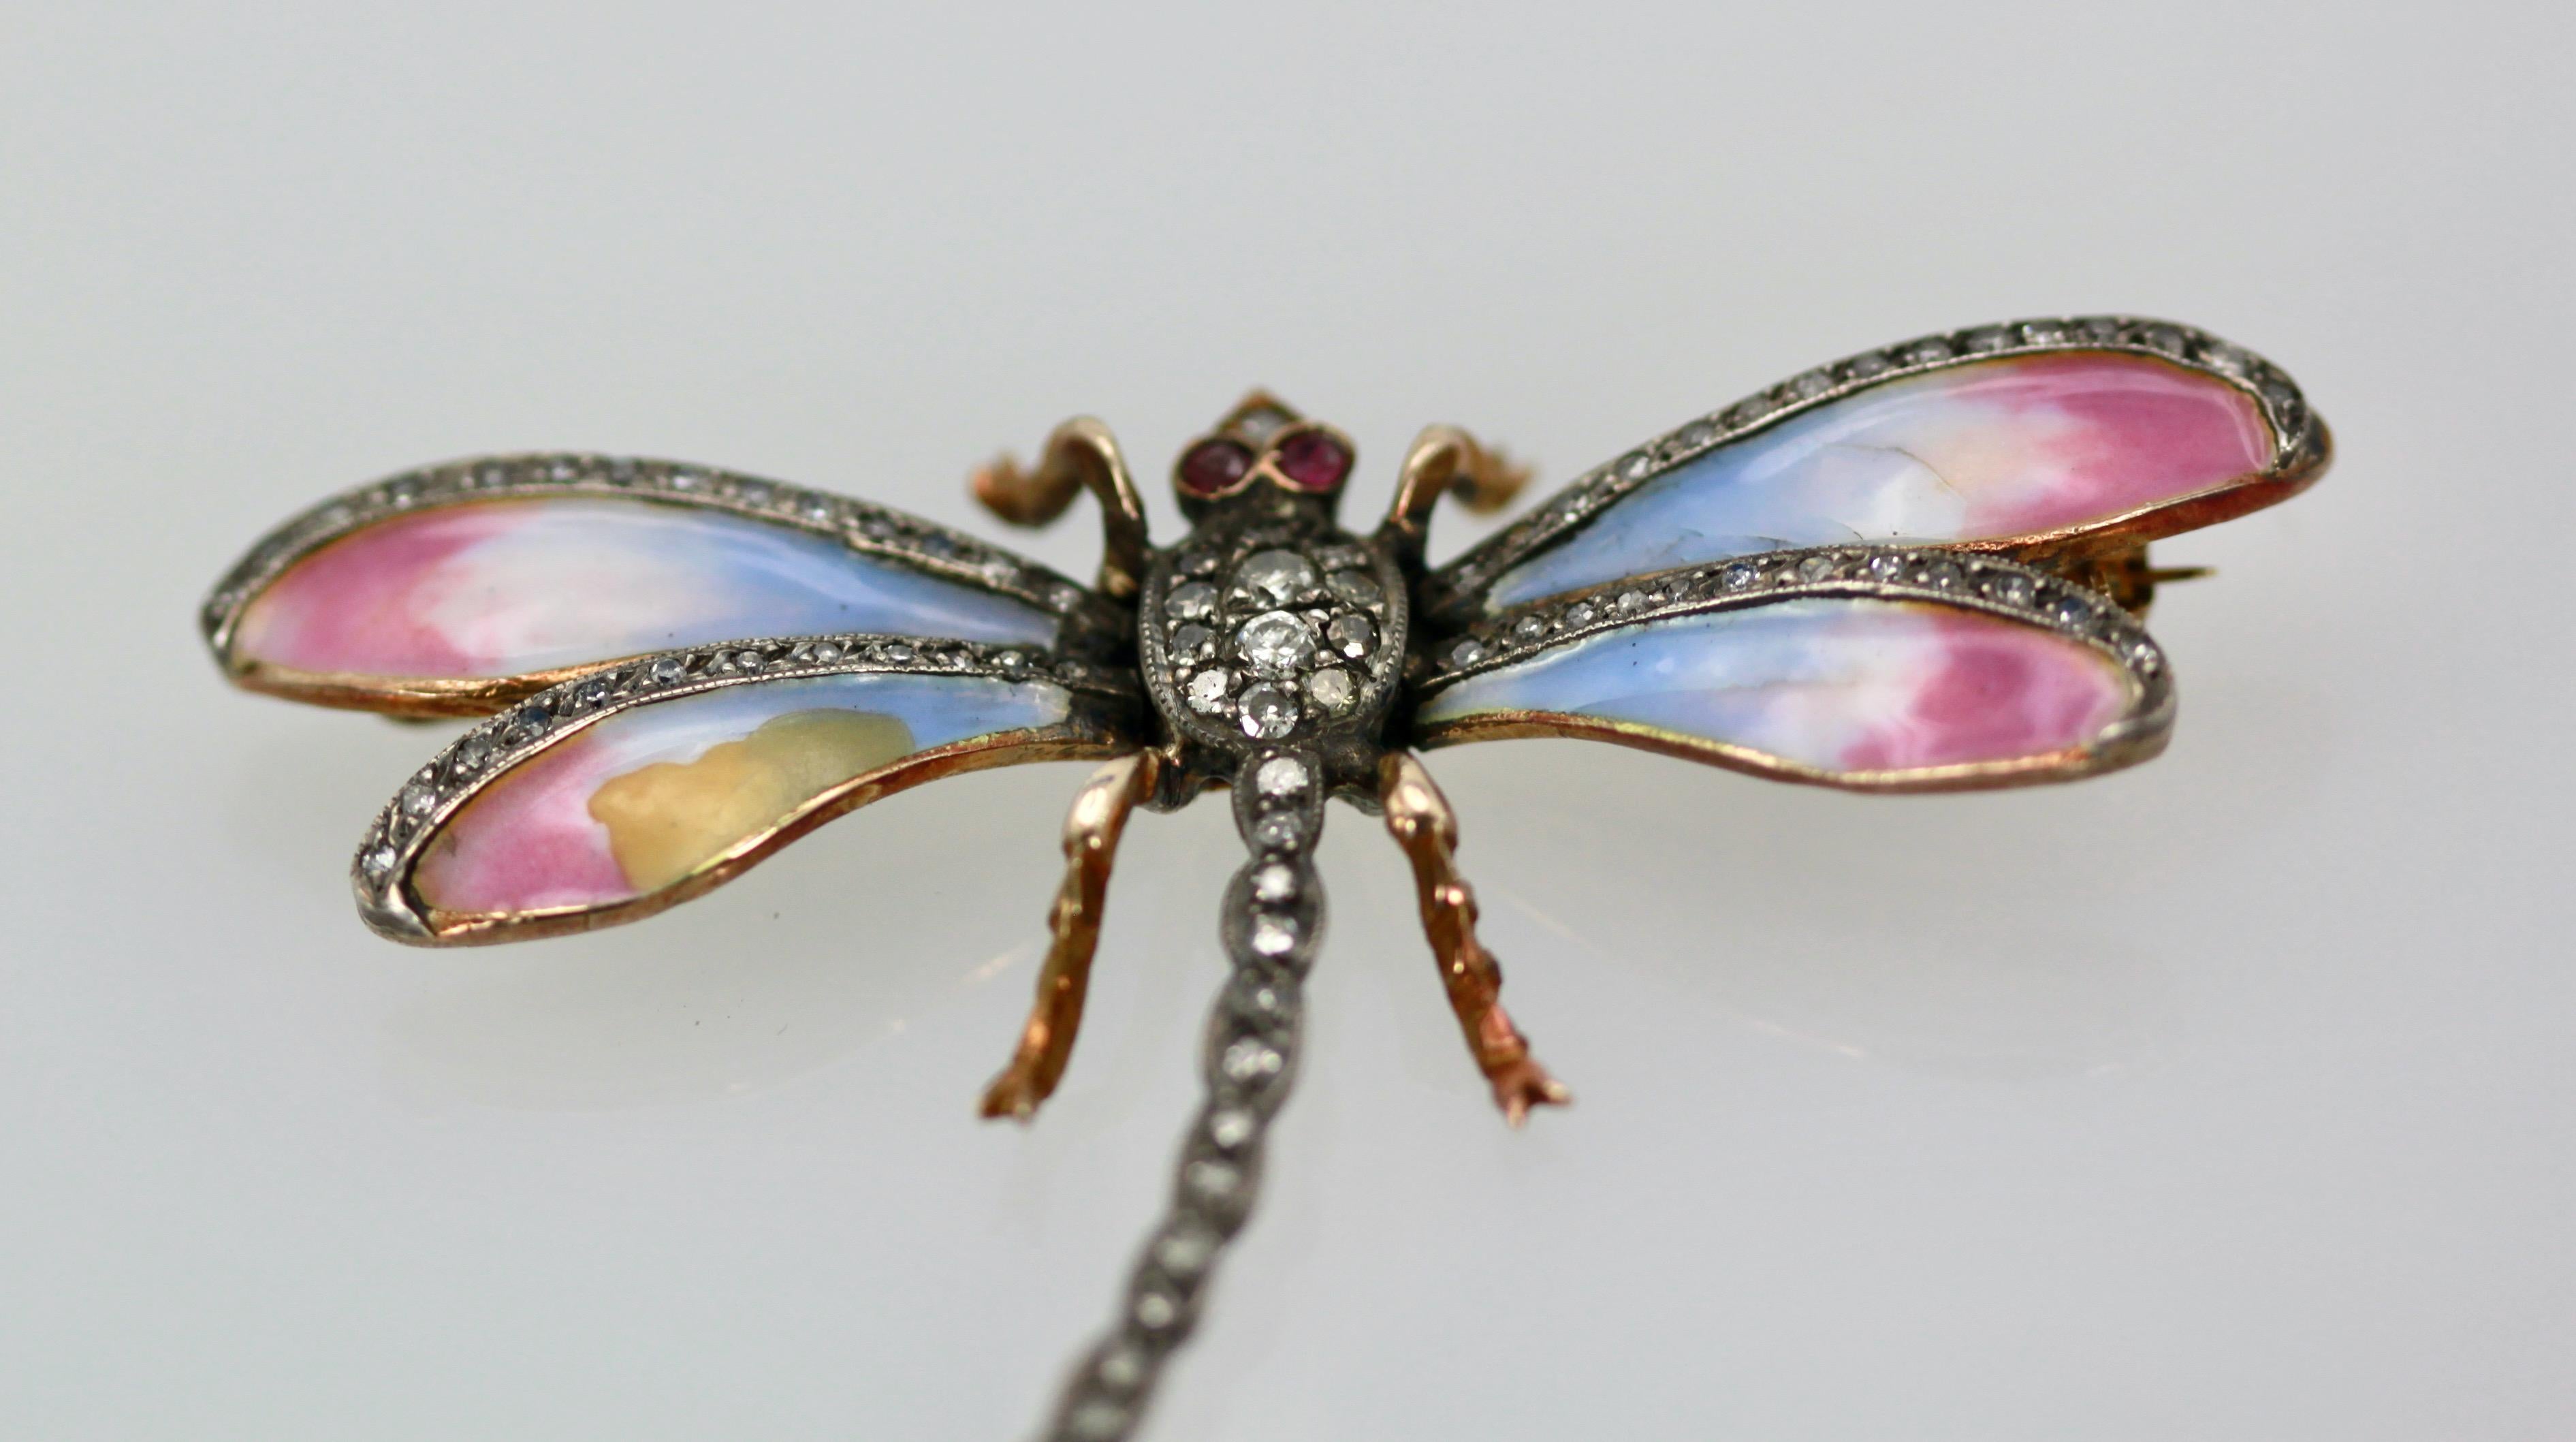 This sweet butterfly has pastel colors of blue pink and a bit of yellow.  This pin is old a Retro piece circa 1940.  The thorax of this enamel Butterfly is all  Diamonds and the tail is Diamonds as are the top of the wings.  Two Ruby eyes, complete